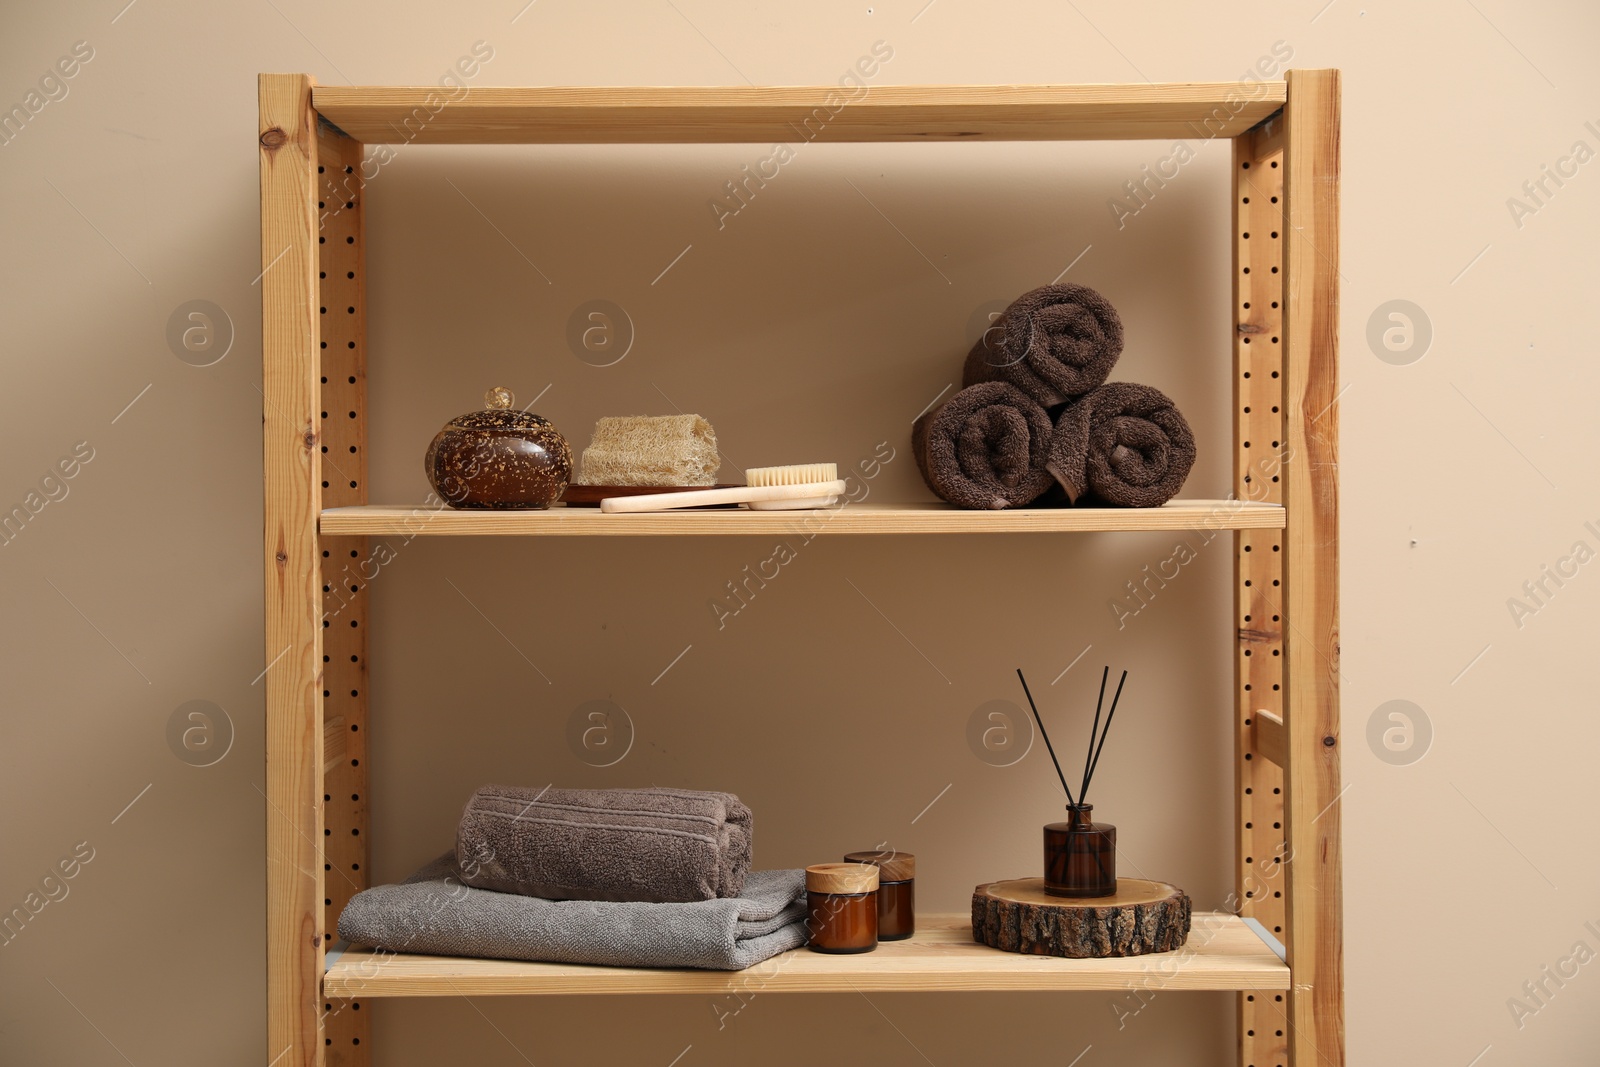 Photo of Soft towels, candles, air freshener and spa products on shelves indoors